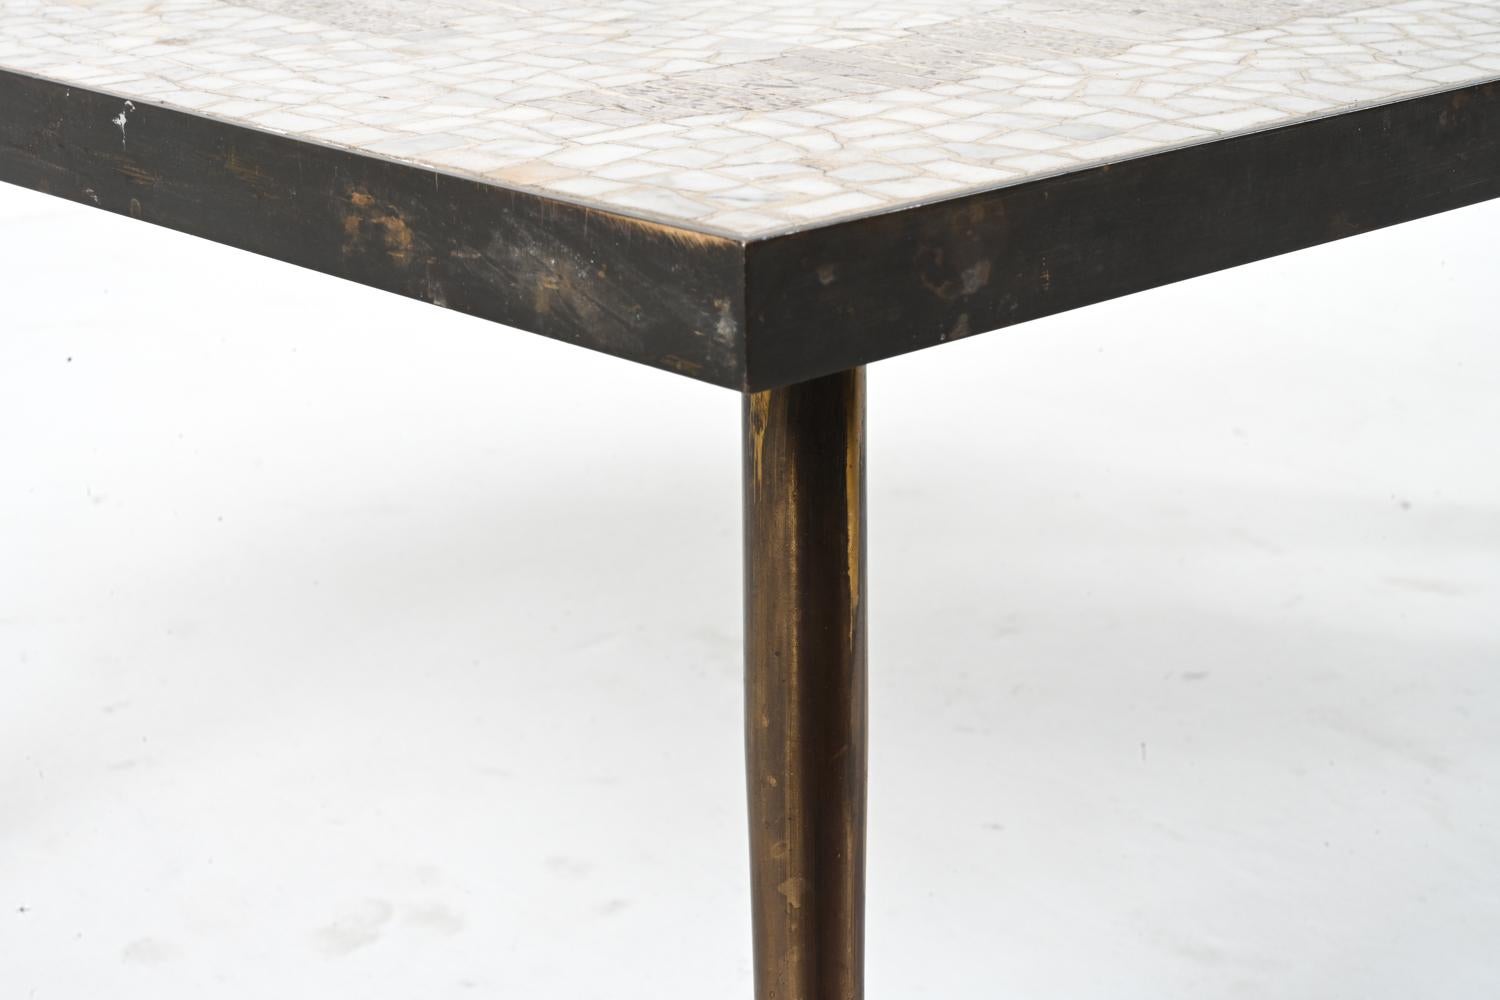 Berthold Muller Brass & Stone Mosaic Coffee Table, Germany, c. 1950's For Sale 1